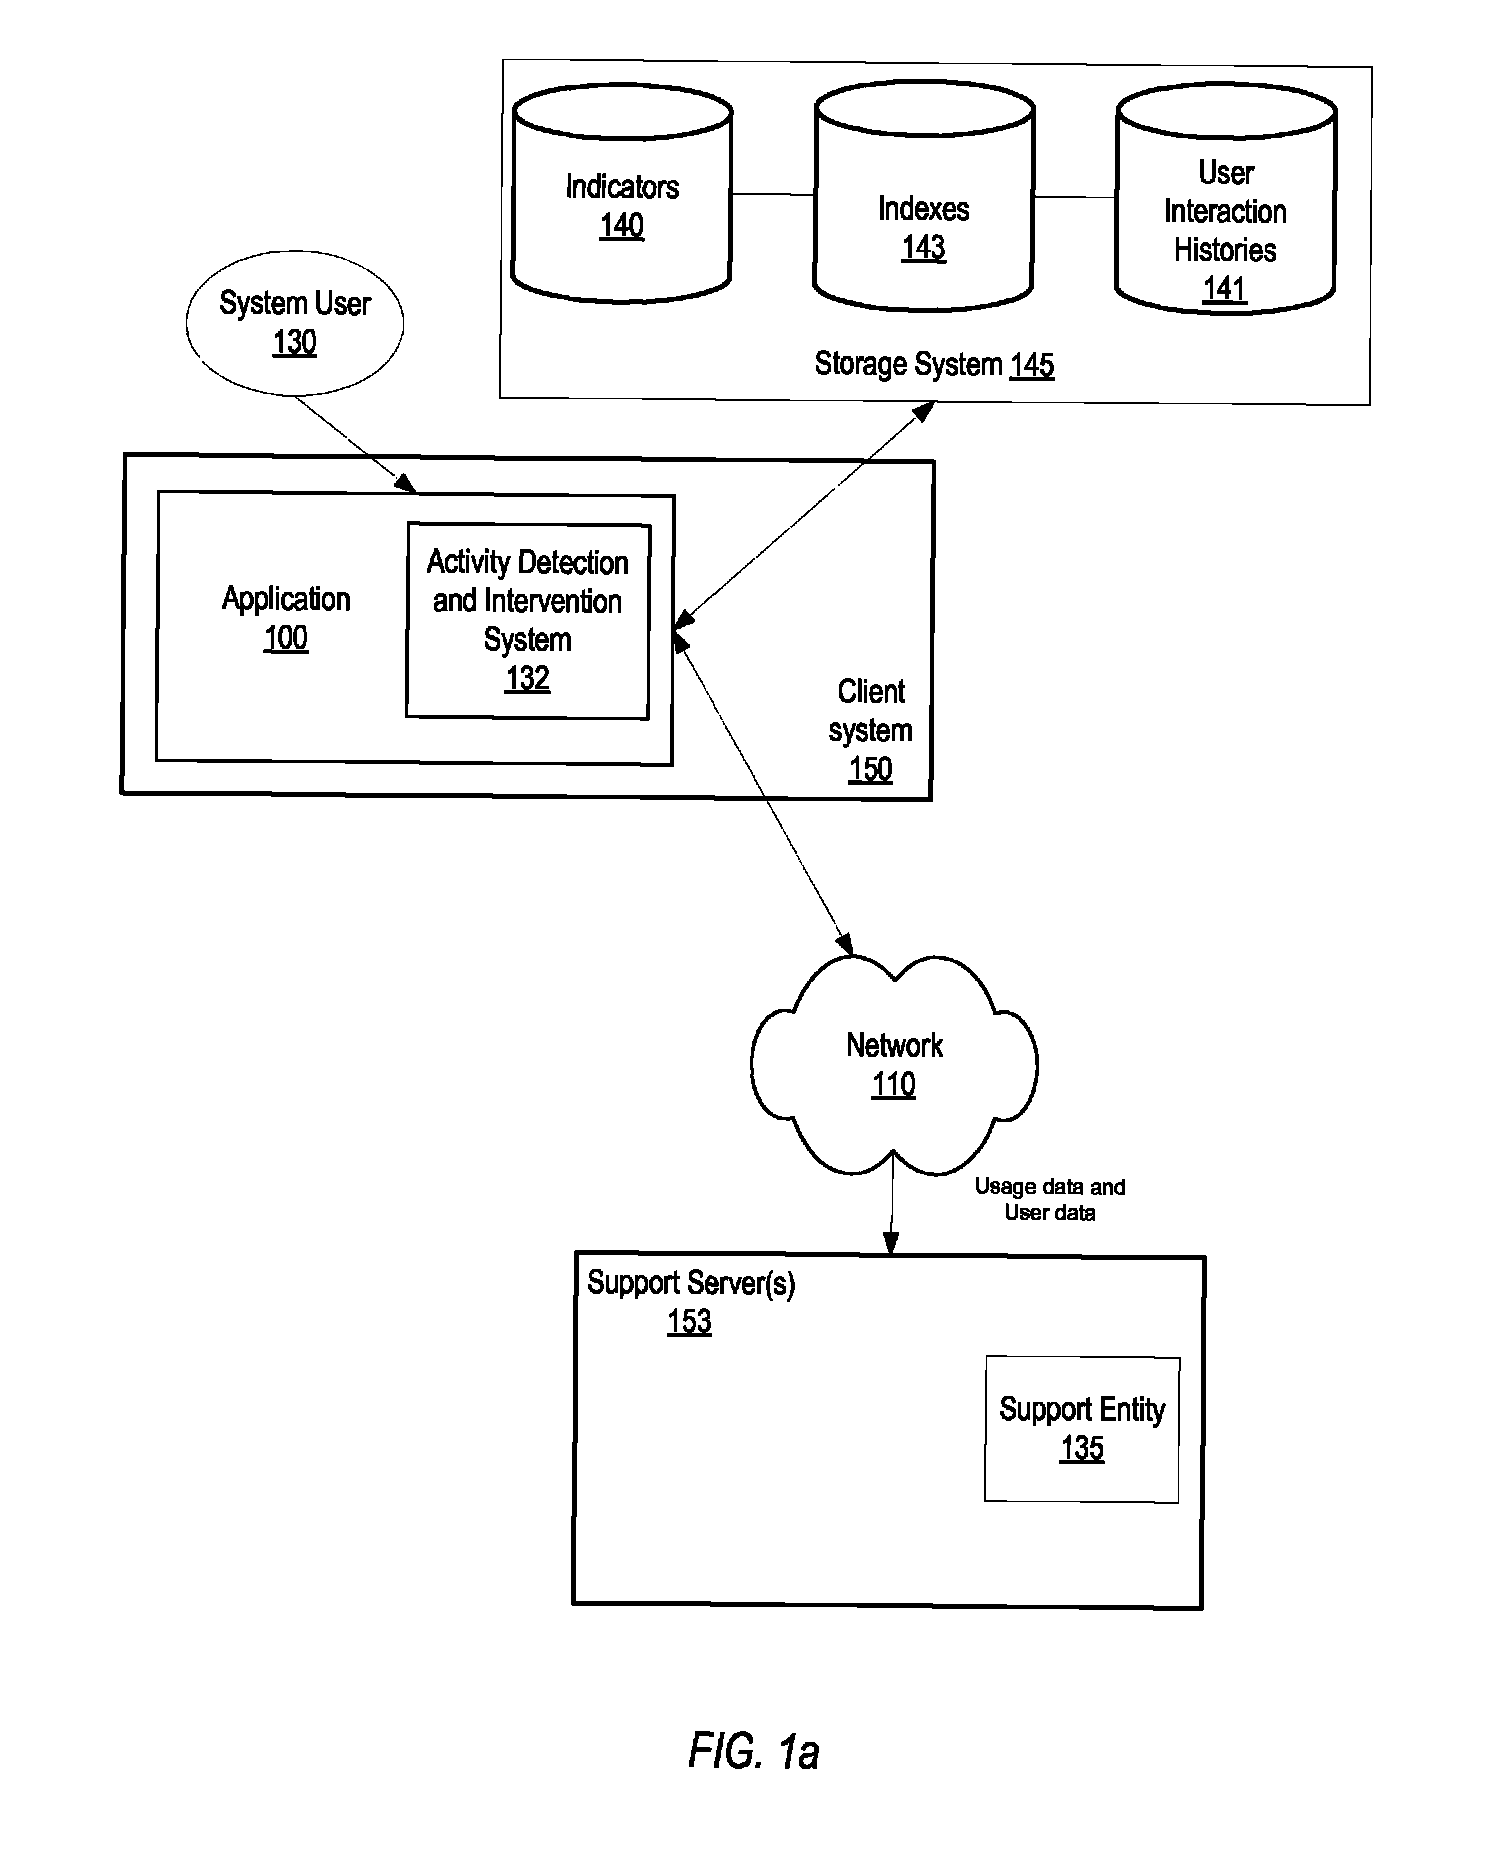 System and method for user support based on user interaction histories